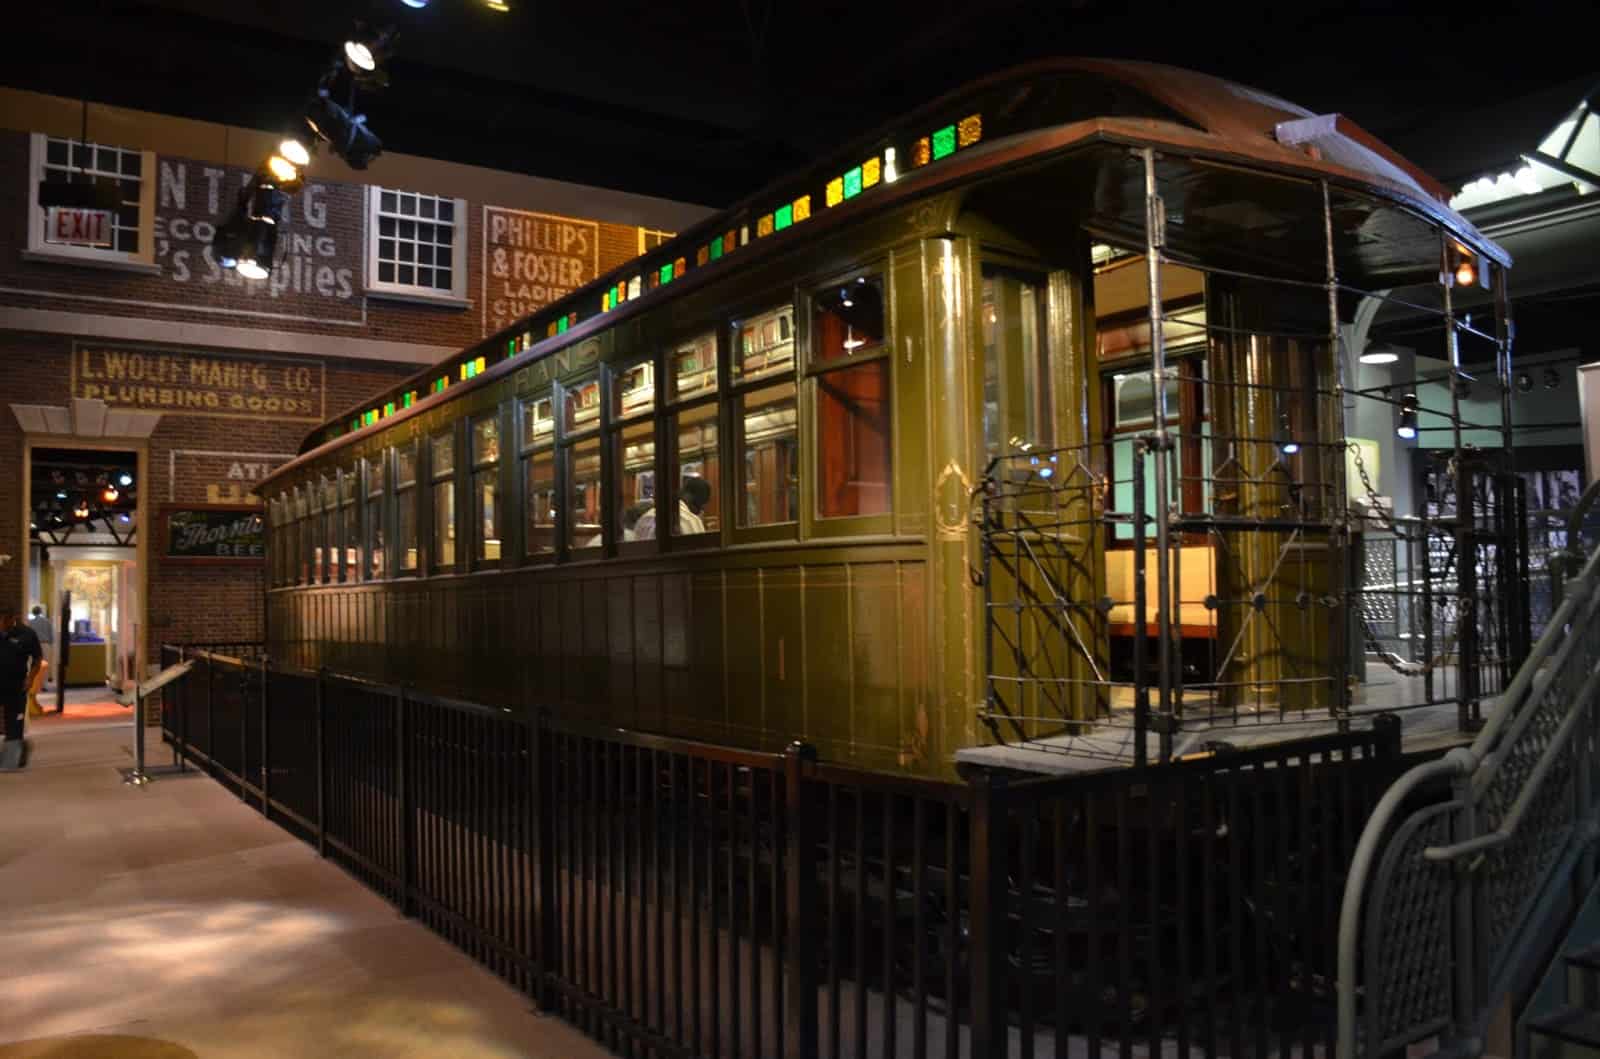 South Side Elevated Railroad car 1 at the Chicago History Museum in Chicago, Illinois